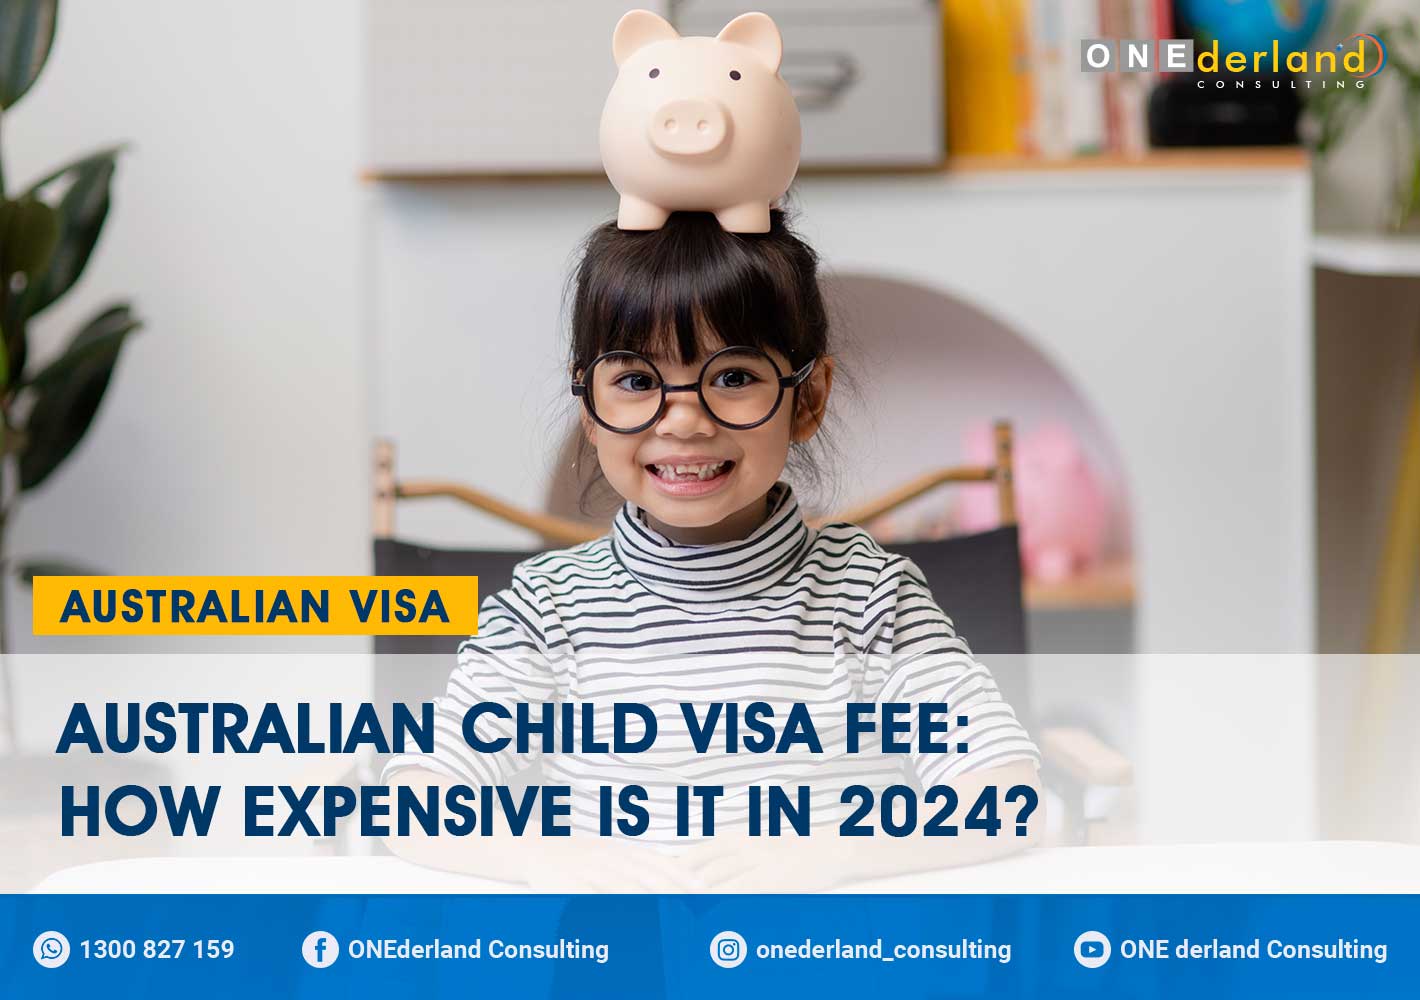 Australian Child Visa Fee: How Expensive is It in 2024?